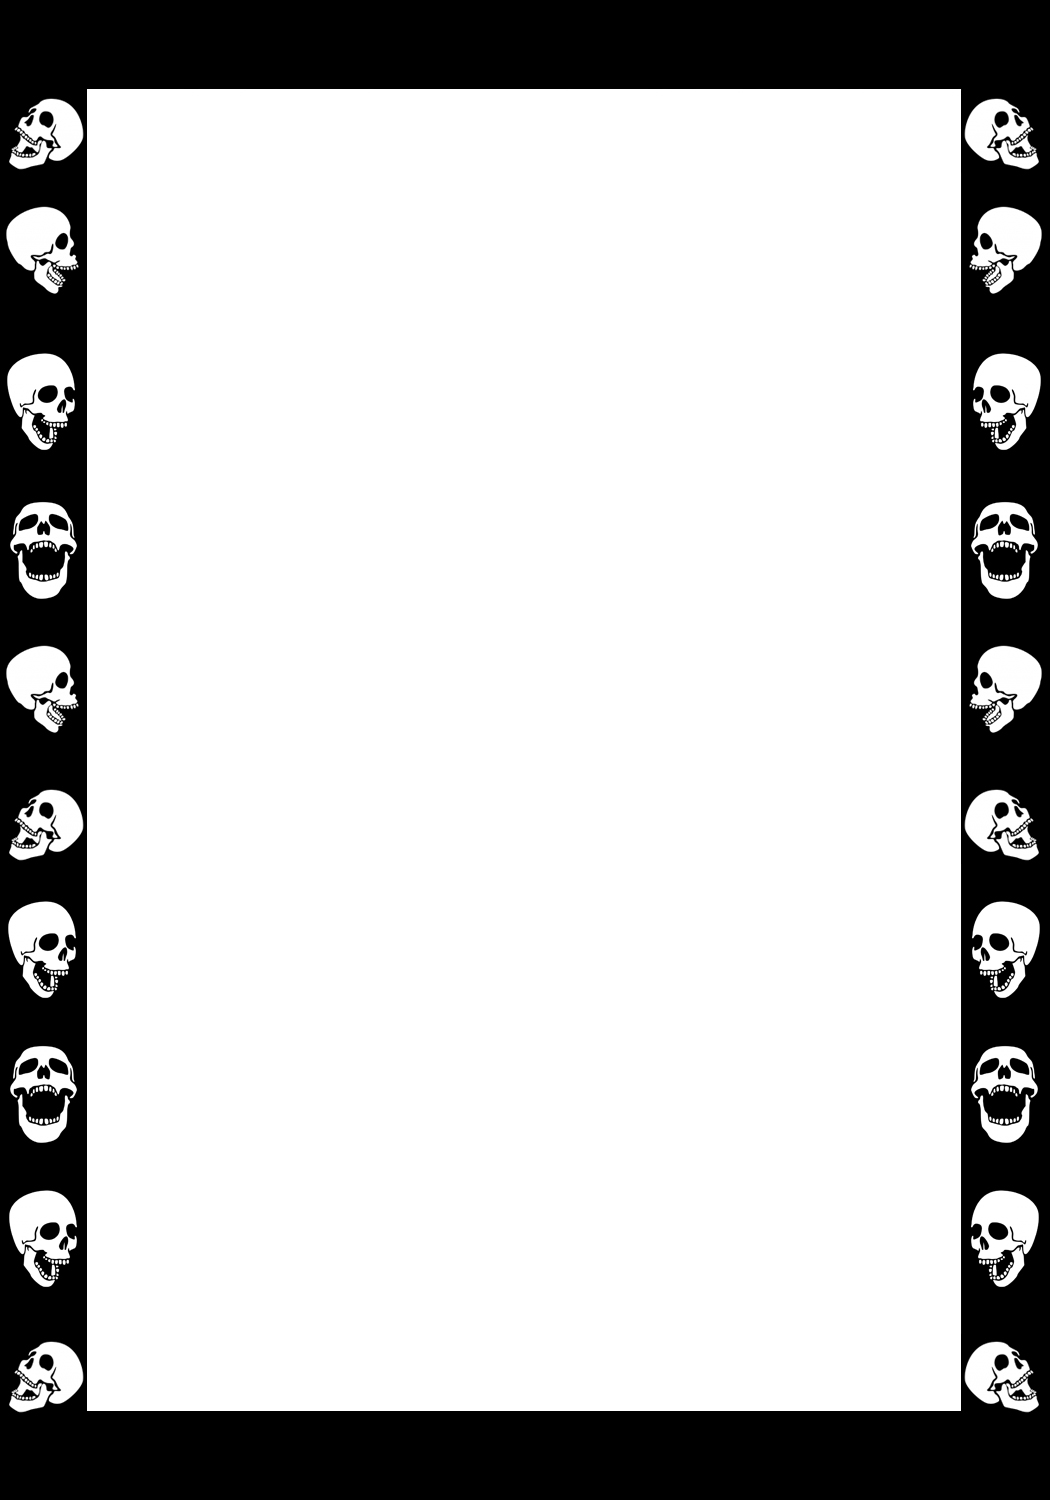 Scary Halloween frame with skulls